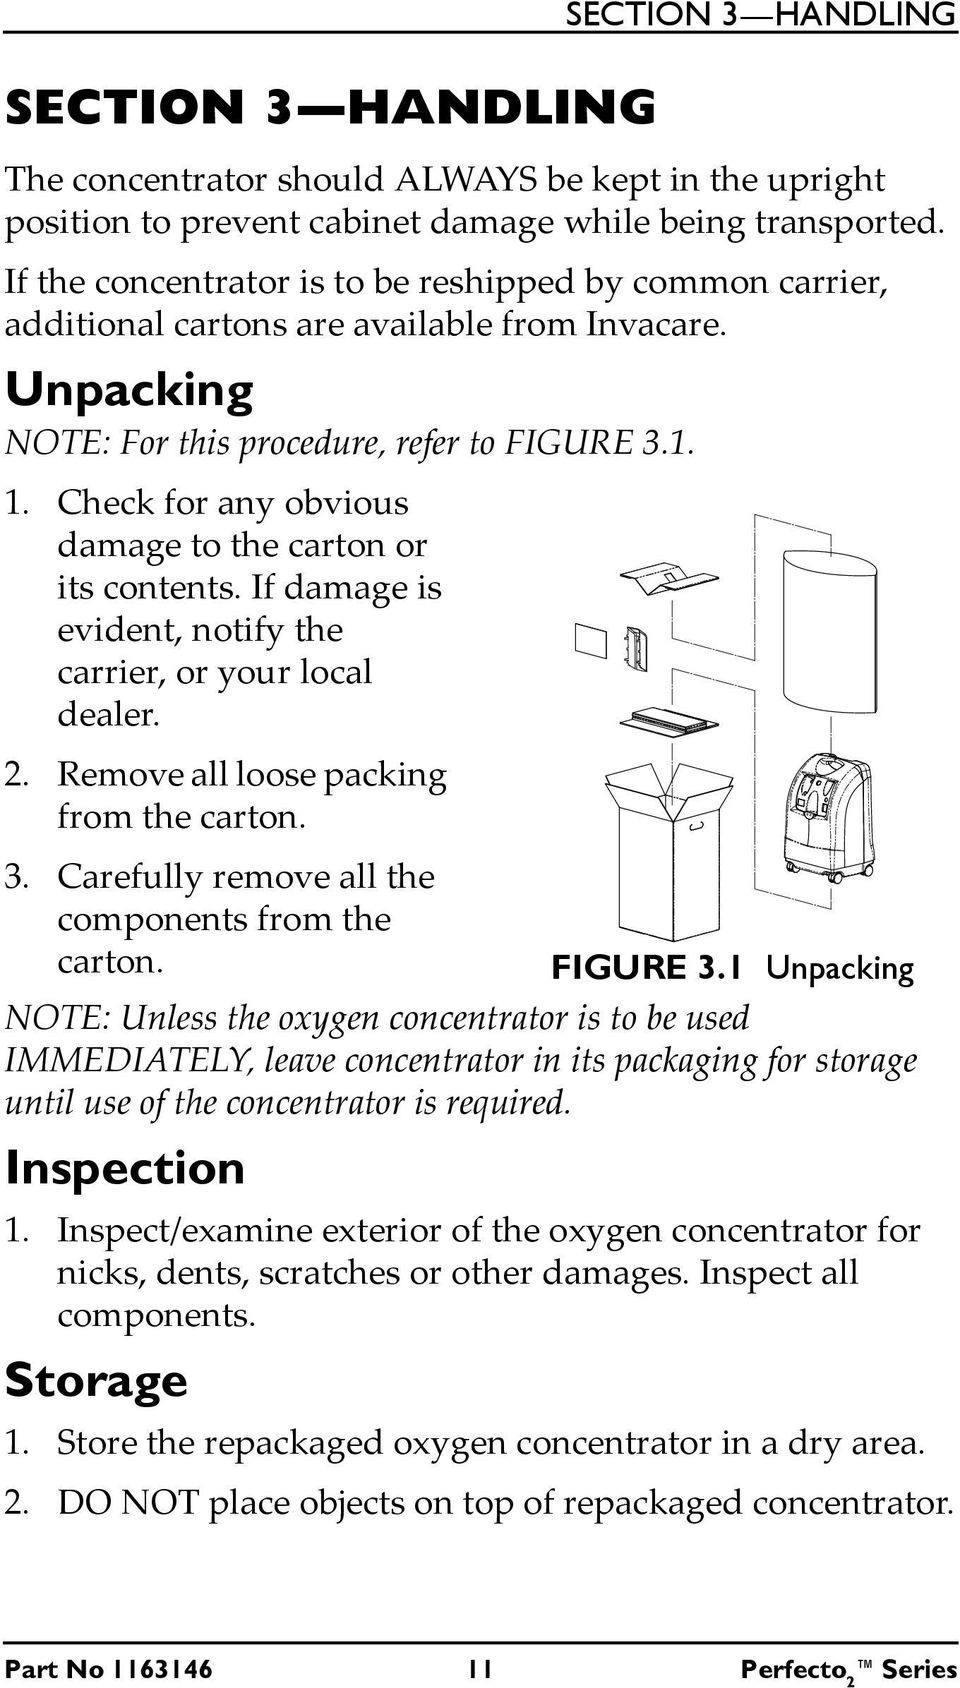 Check for any obvious damage to the carton or its contents. If damage is evident, notify the carrier, or your local dealer. 2. Remove all loose packing from the carton. 3.